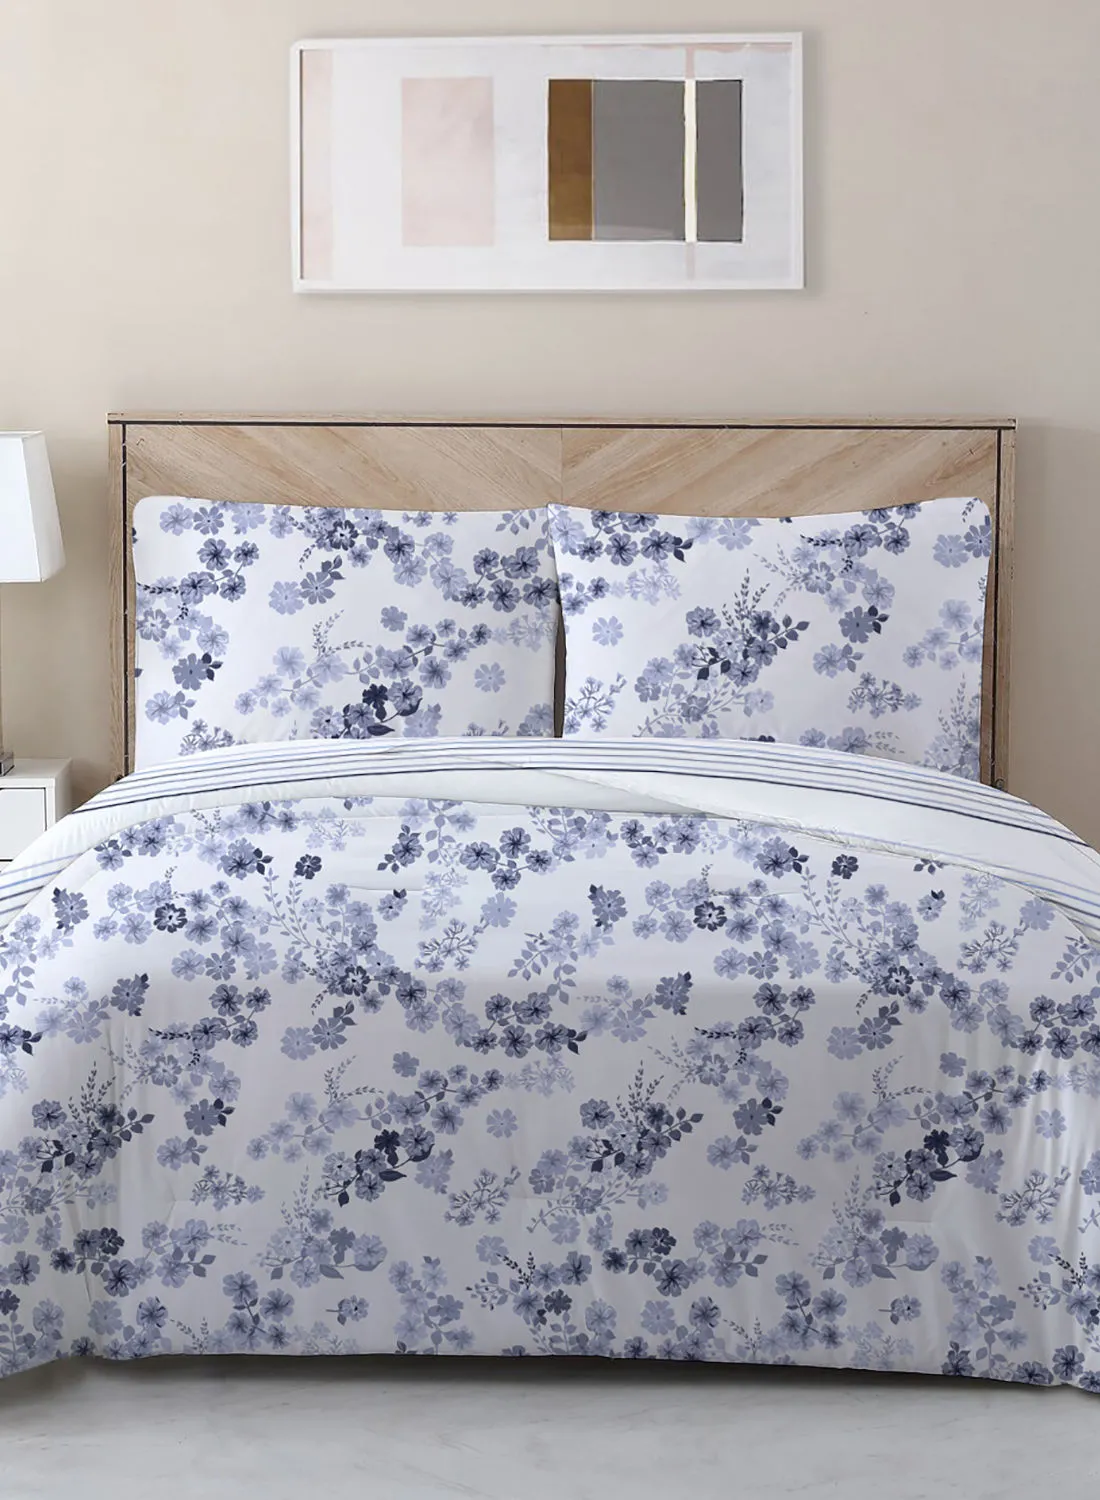 Amal Comforter Set Queen Size All Season Everyday Use Bedding Set 100% Cotton 3 Pieces 1 Comforter 2 Pillow Covers  Floral Blue